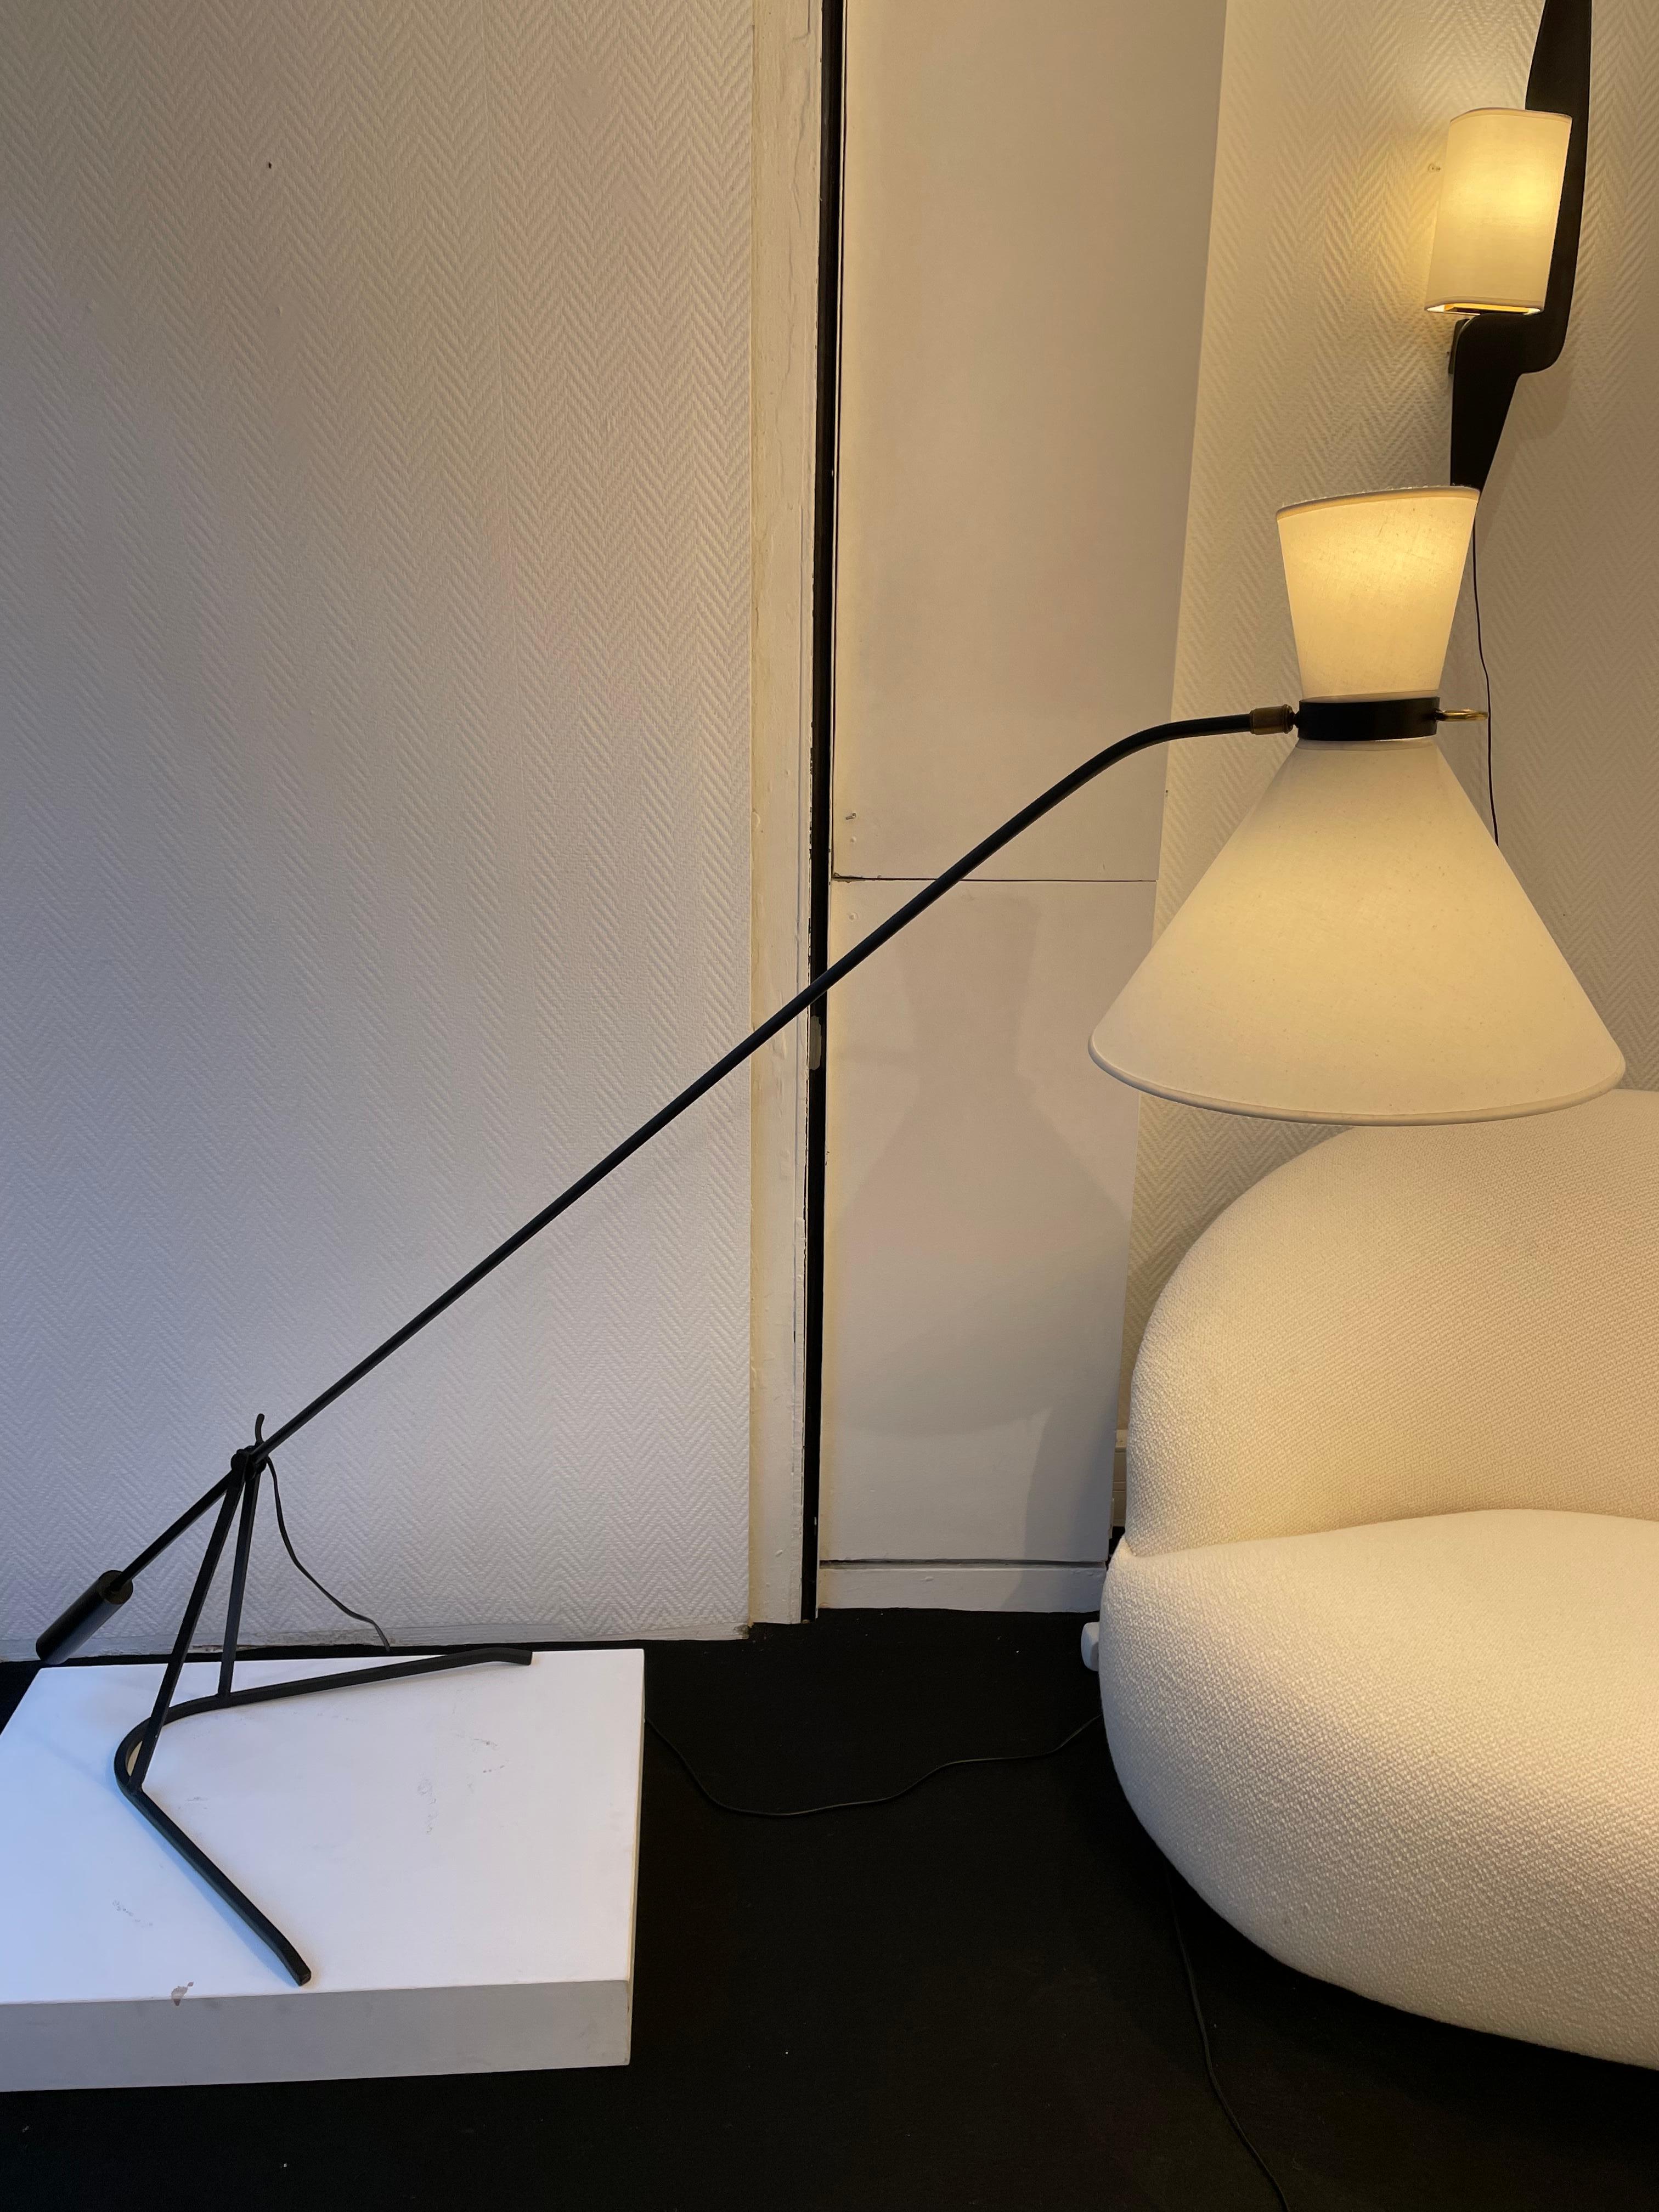 Counterweight floor lamp By Arlus from 1950.
In metal.